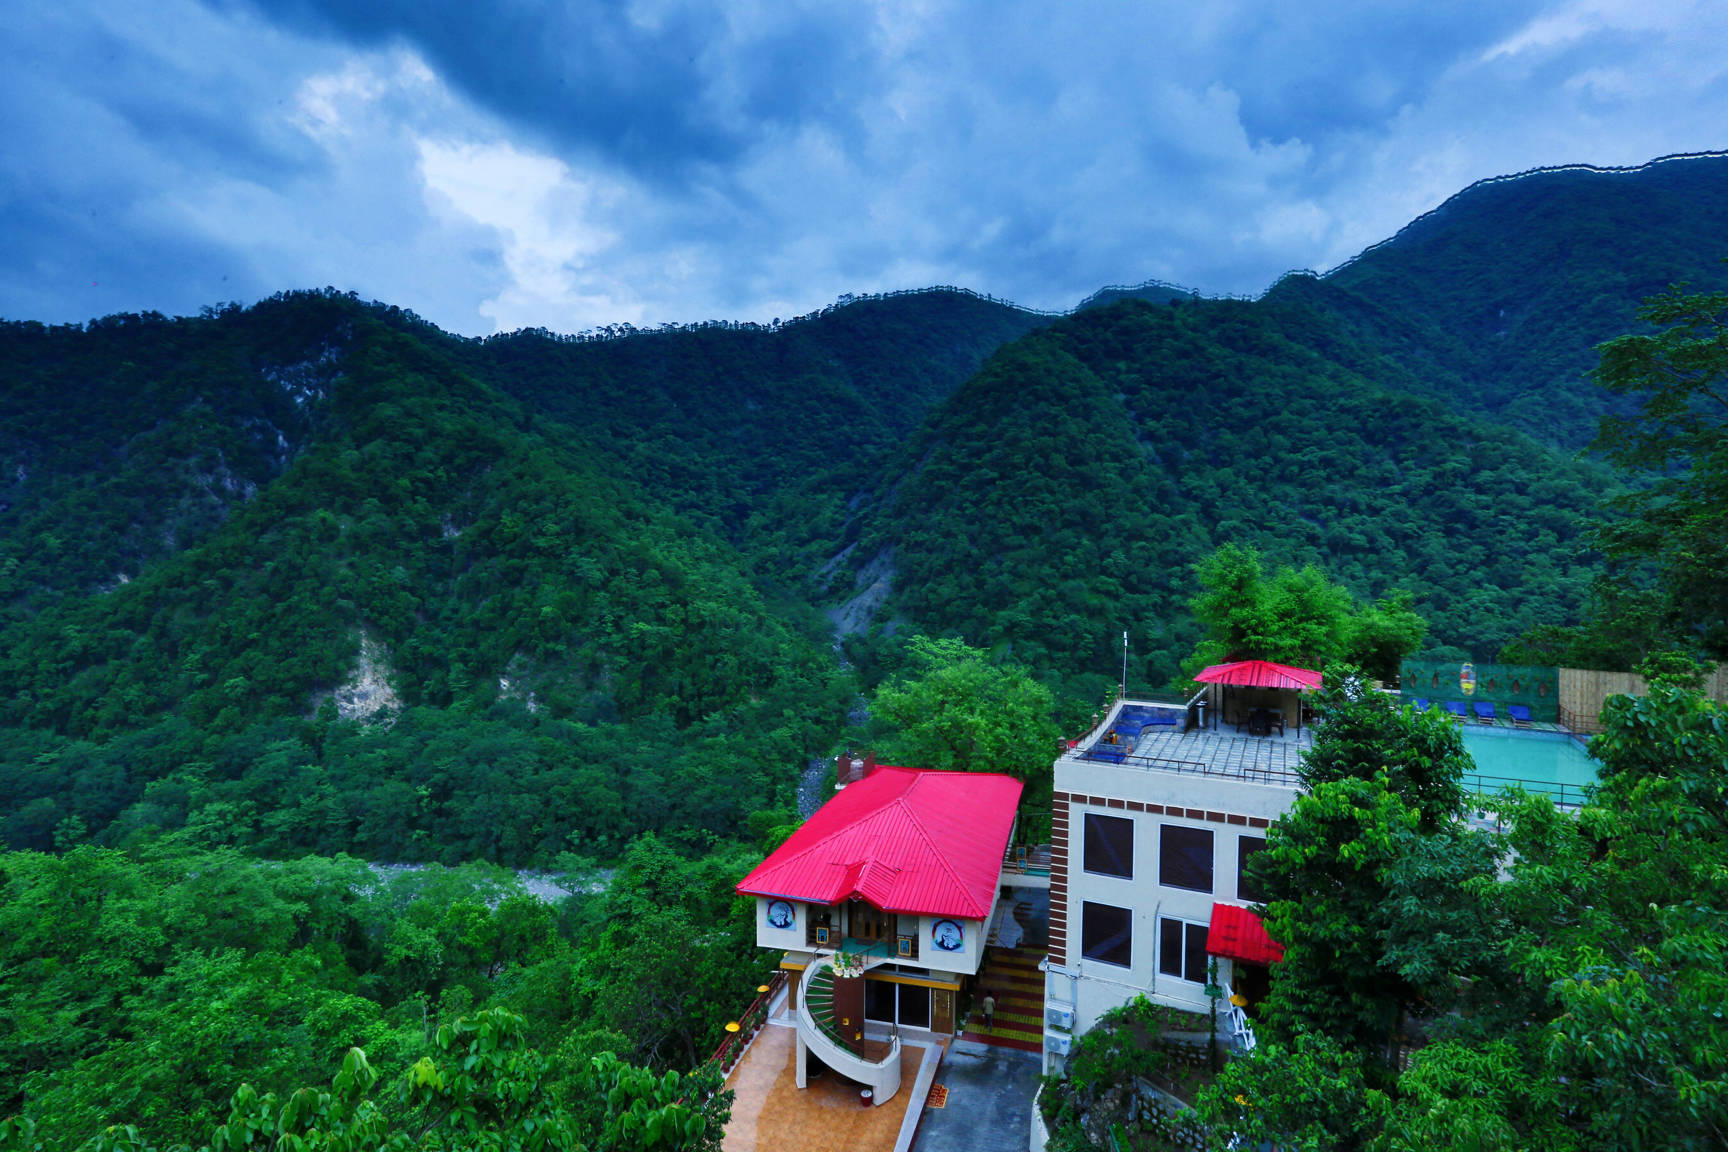 Luxury Meets Natural Beauty at Veda5 Ayurveda and Yoga Luxury World-Class Retreat in the Himalayas in Rishikesh India